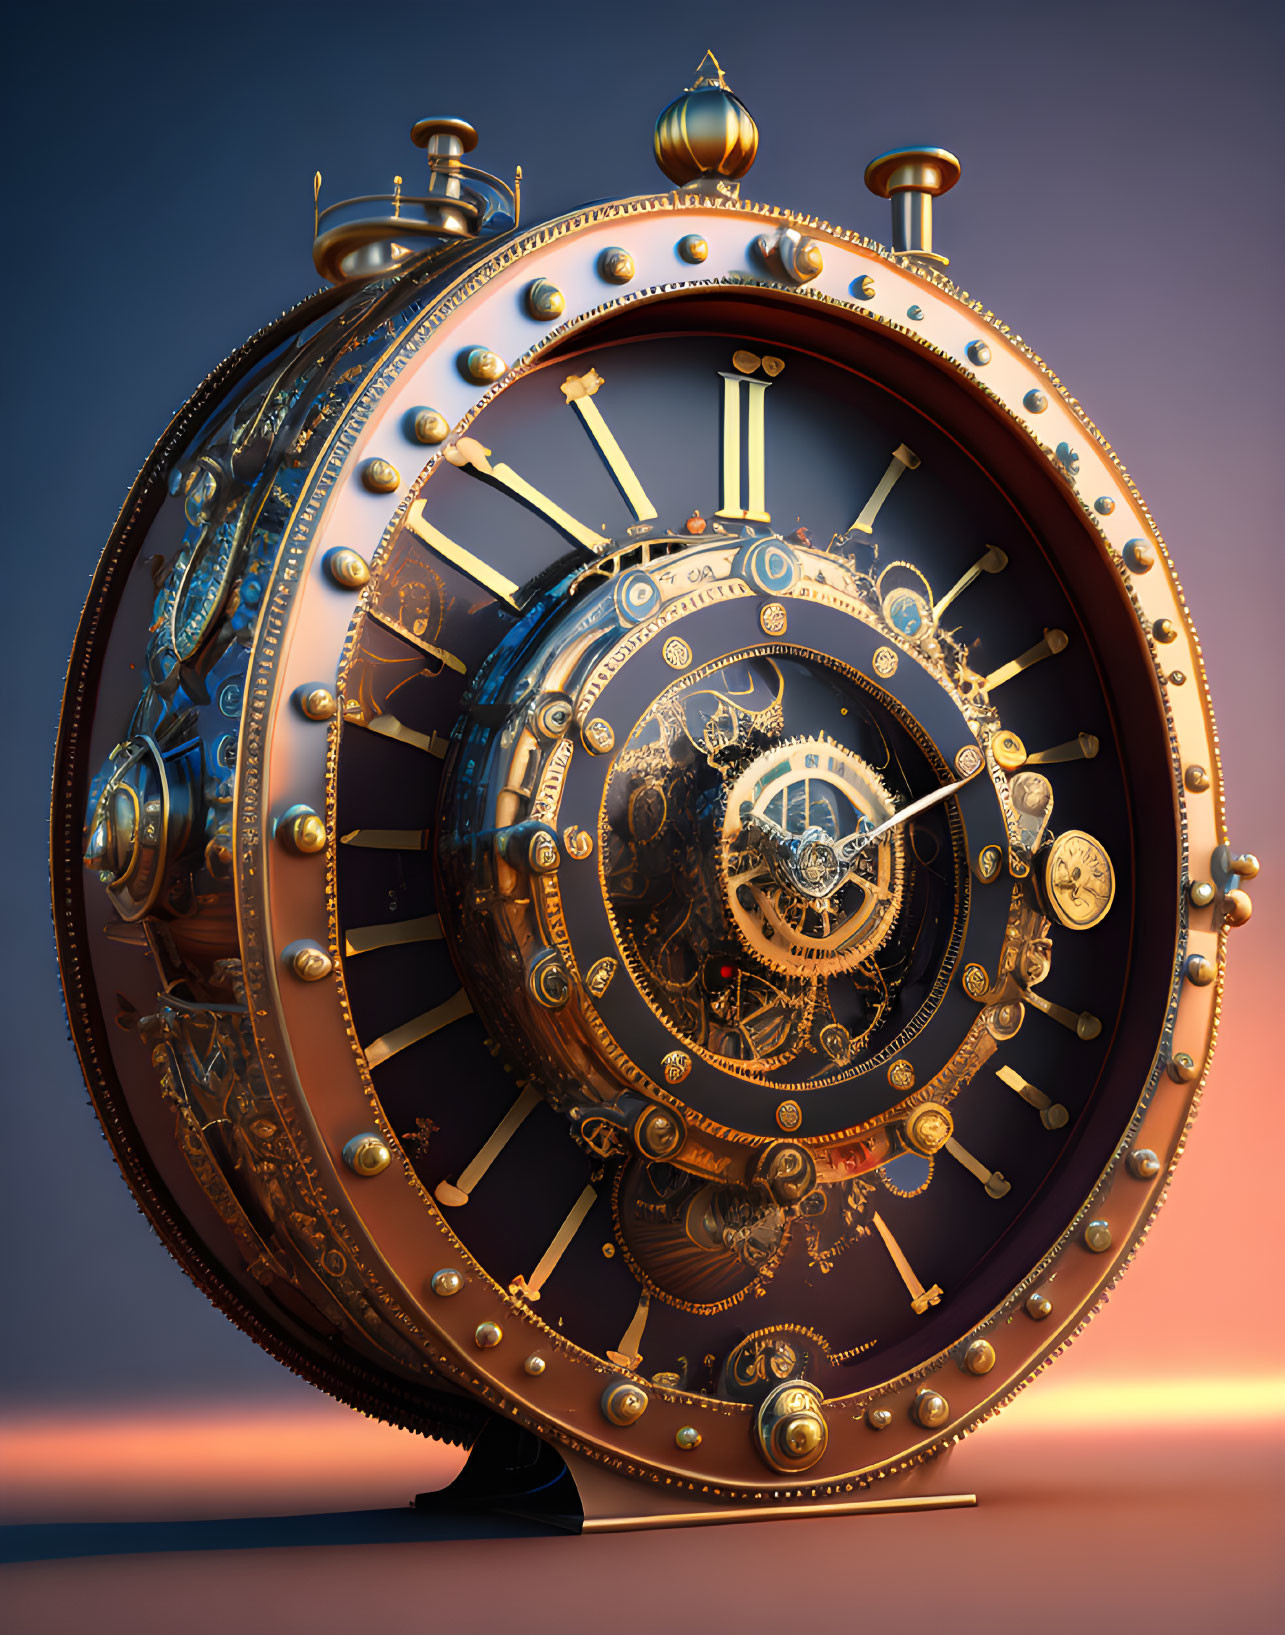 Steampunk-style pocket watch with exposed gears and metallic details